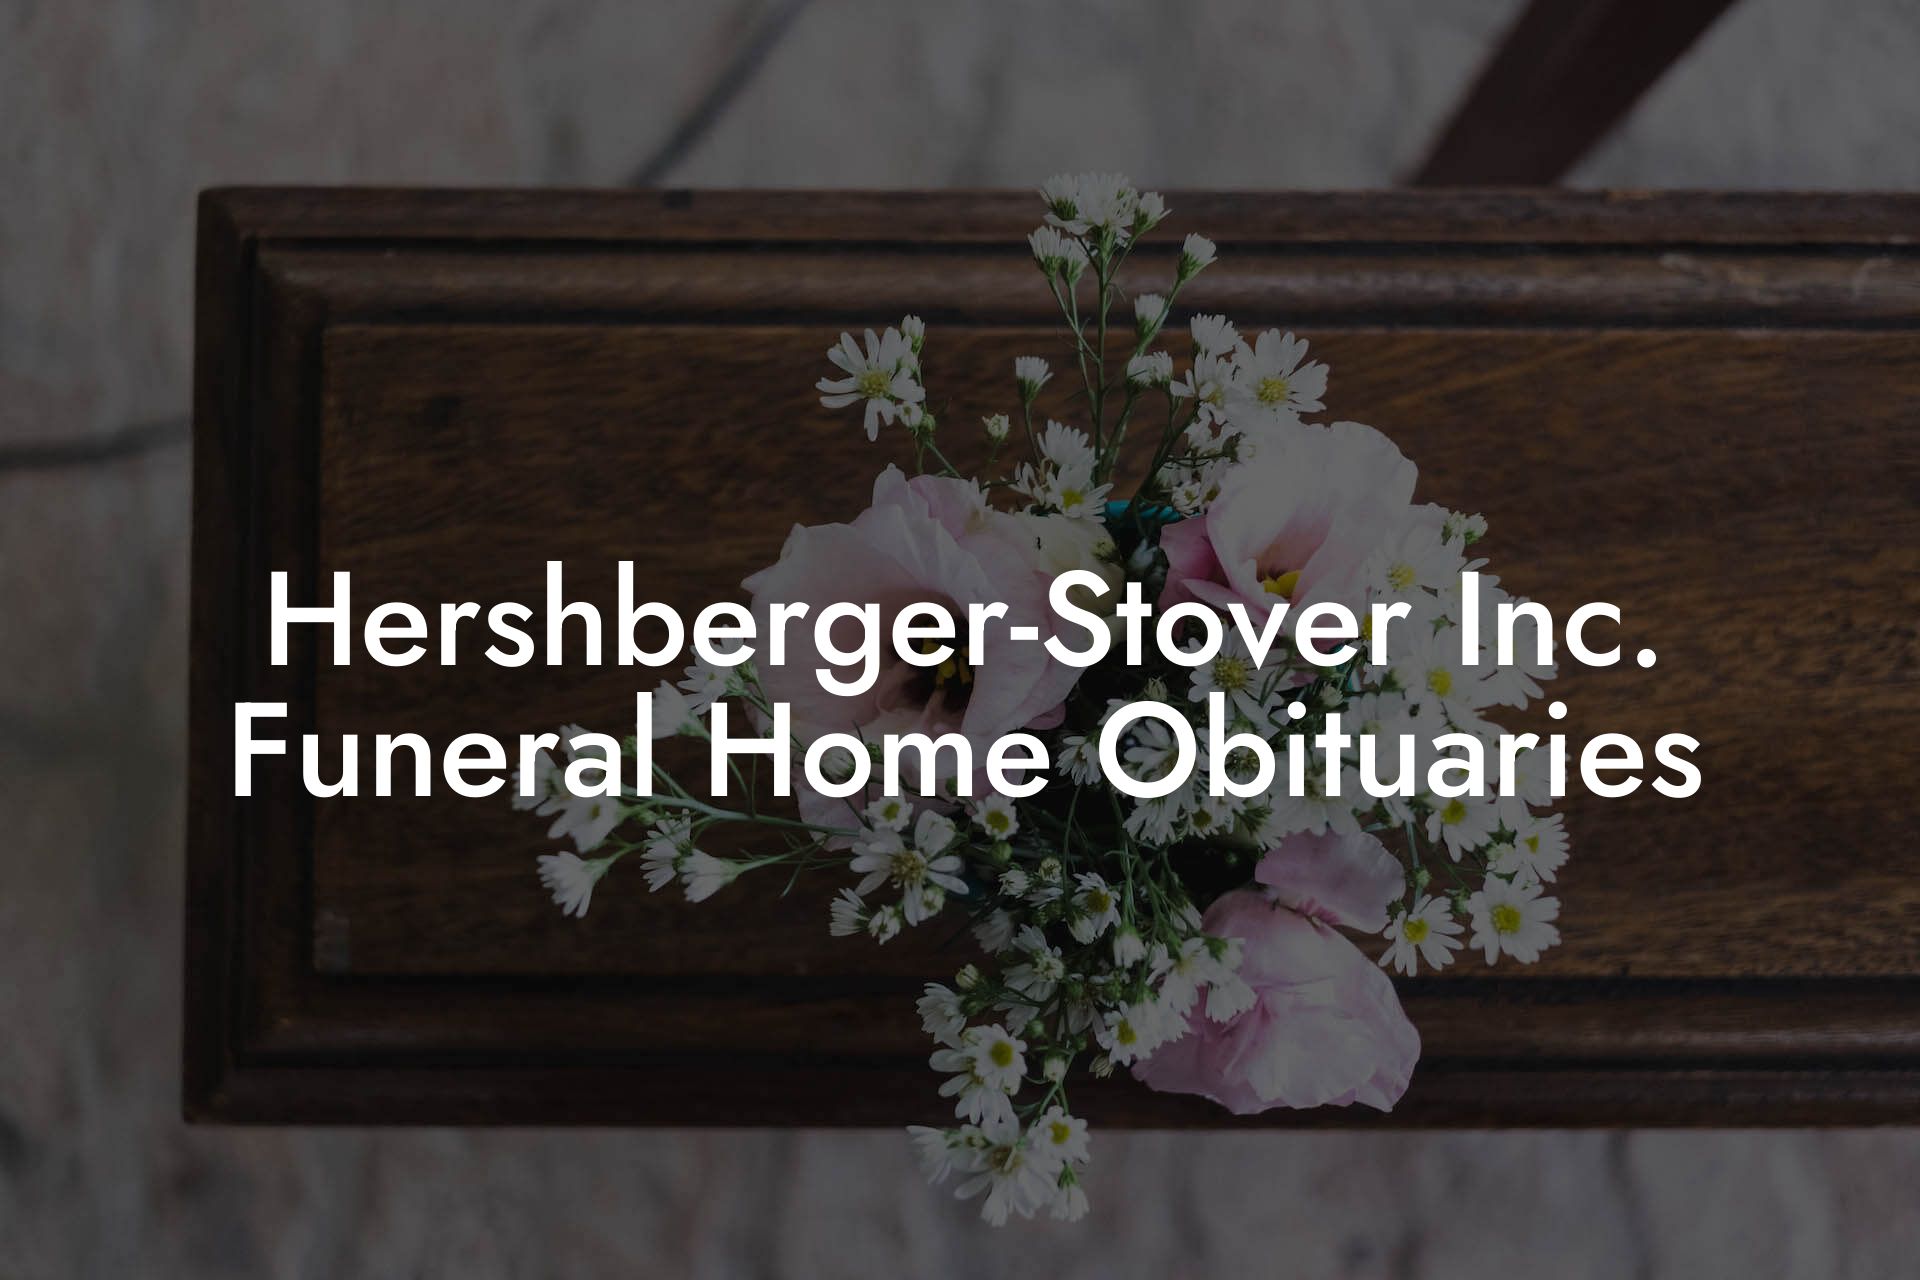 Hershberger-Stover Inc. Funeral Home Obituaries